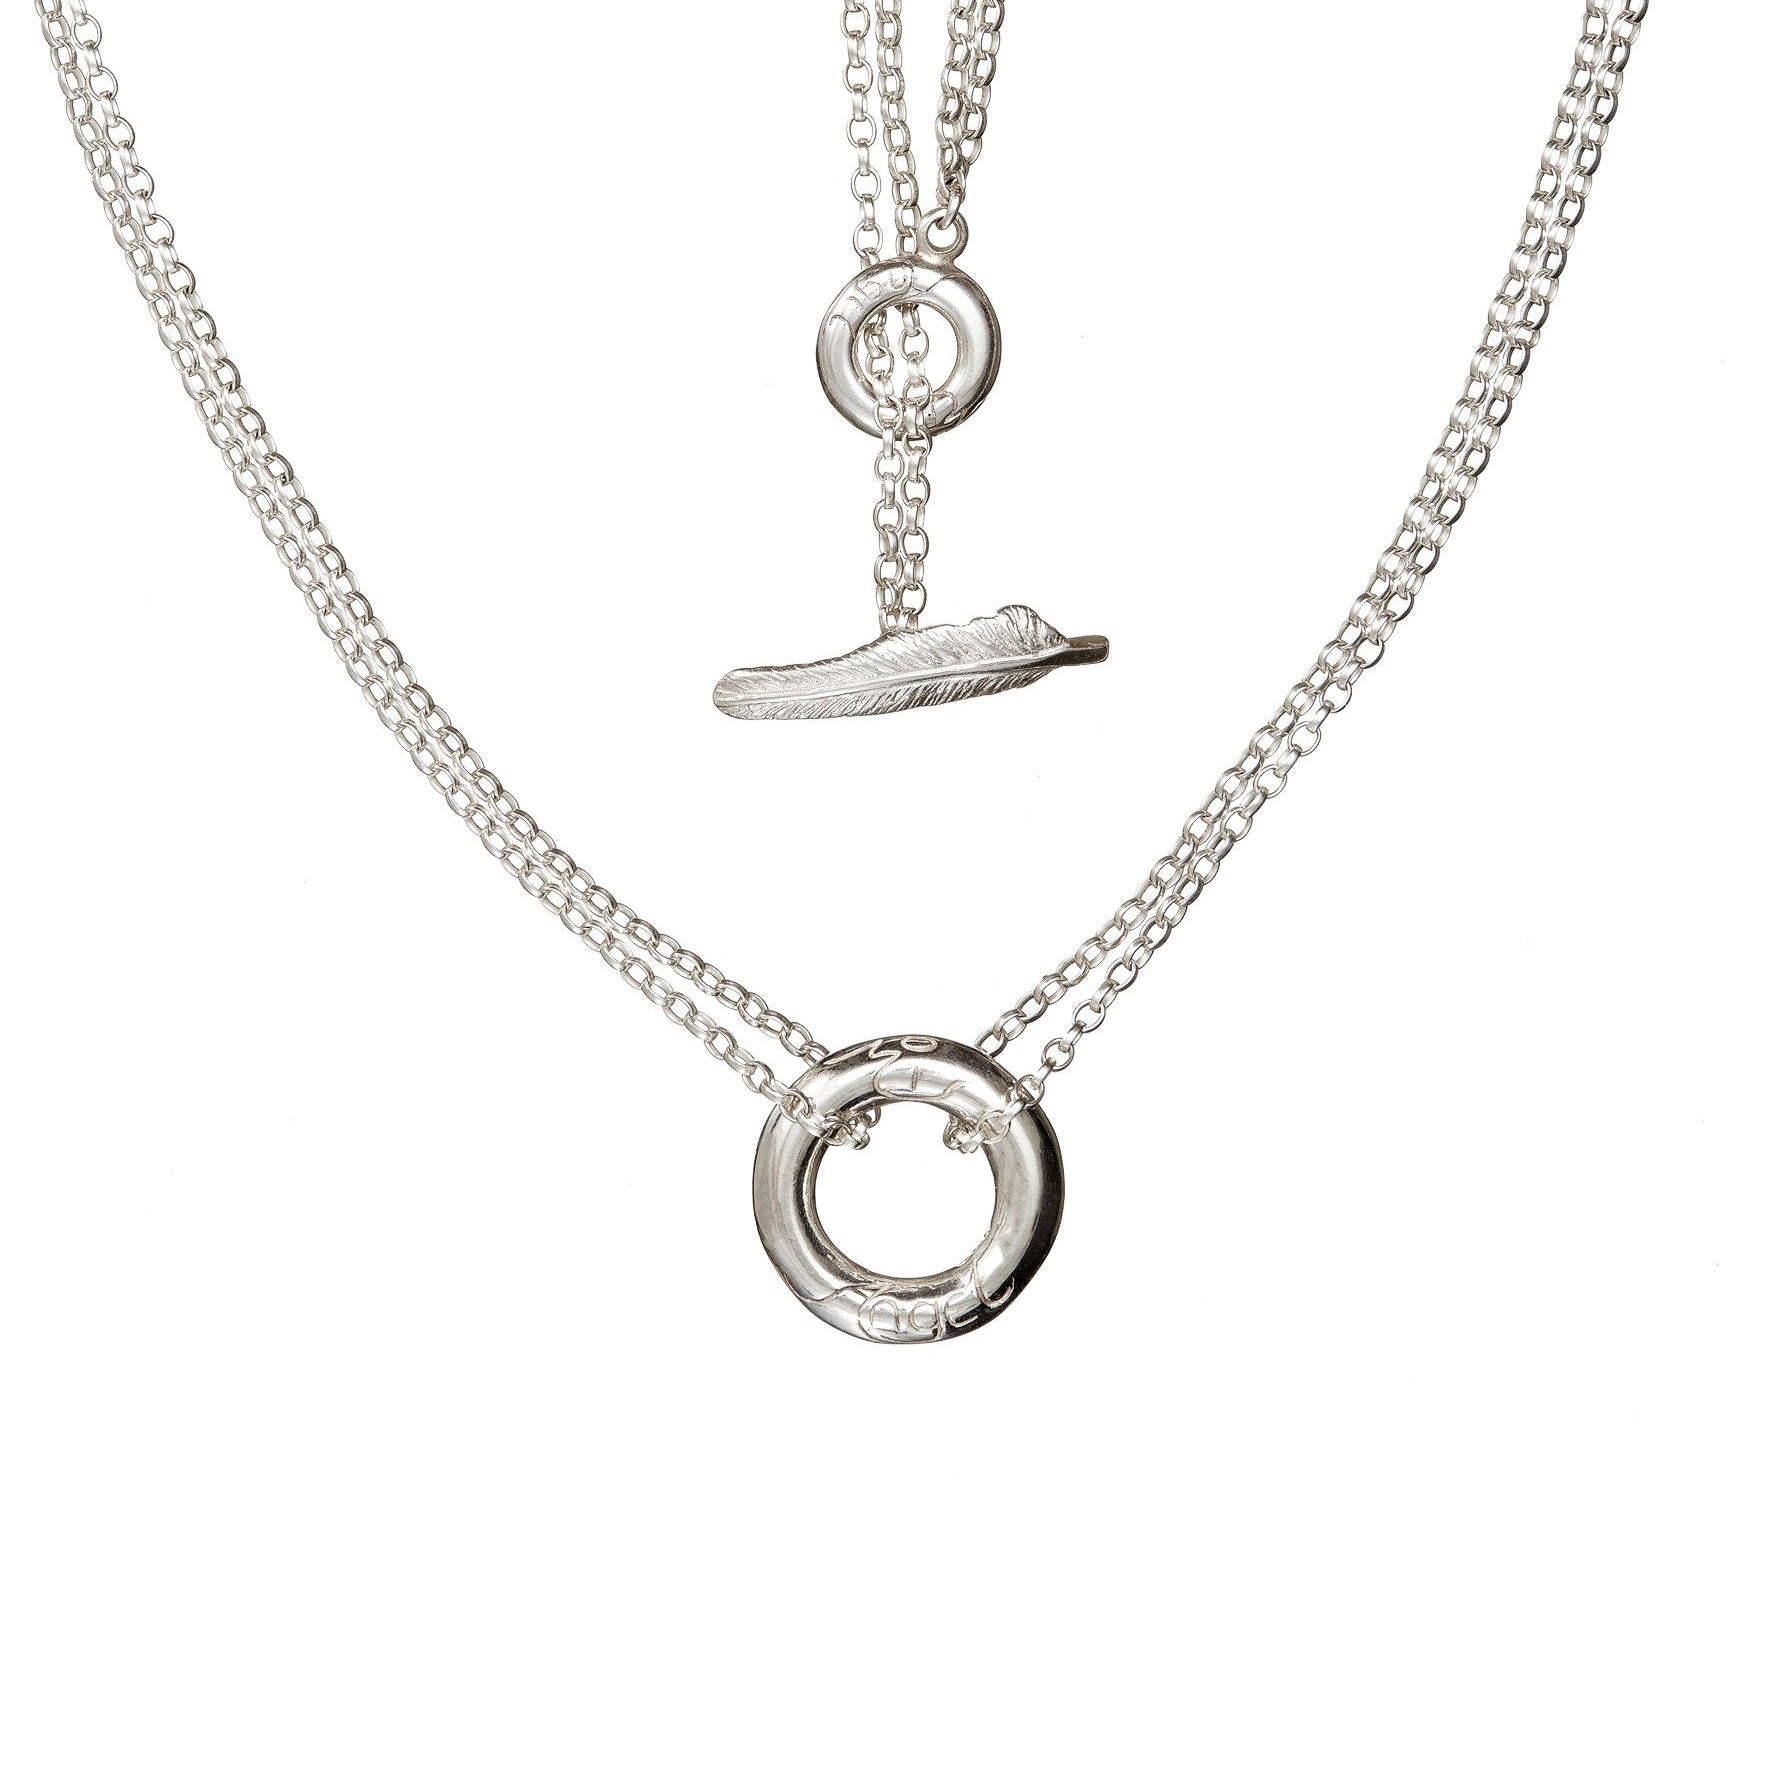 Embrace of the Angels Necklet, handcrafted from sterling silver, from Elena Brennan's Irish angel jewelry collection.